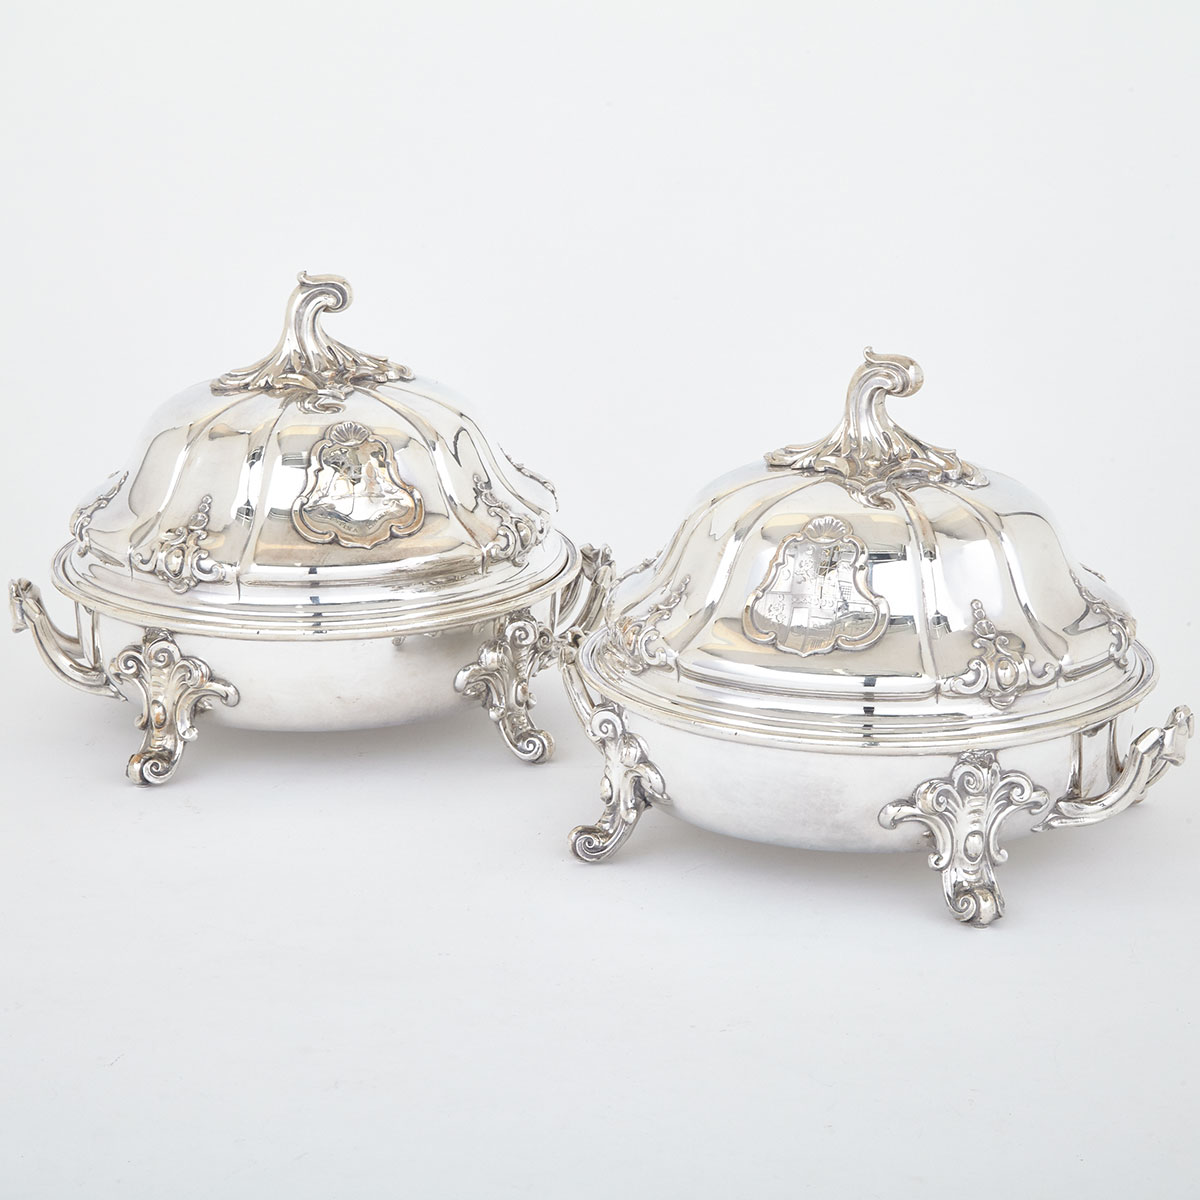 Pair of Old Sheffield Plate Covered Entrée Dishes with Warming Stands, Roberts, Smith & Co., Sheffield, c.1830